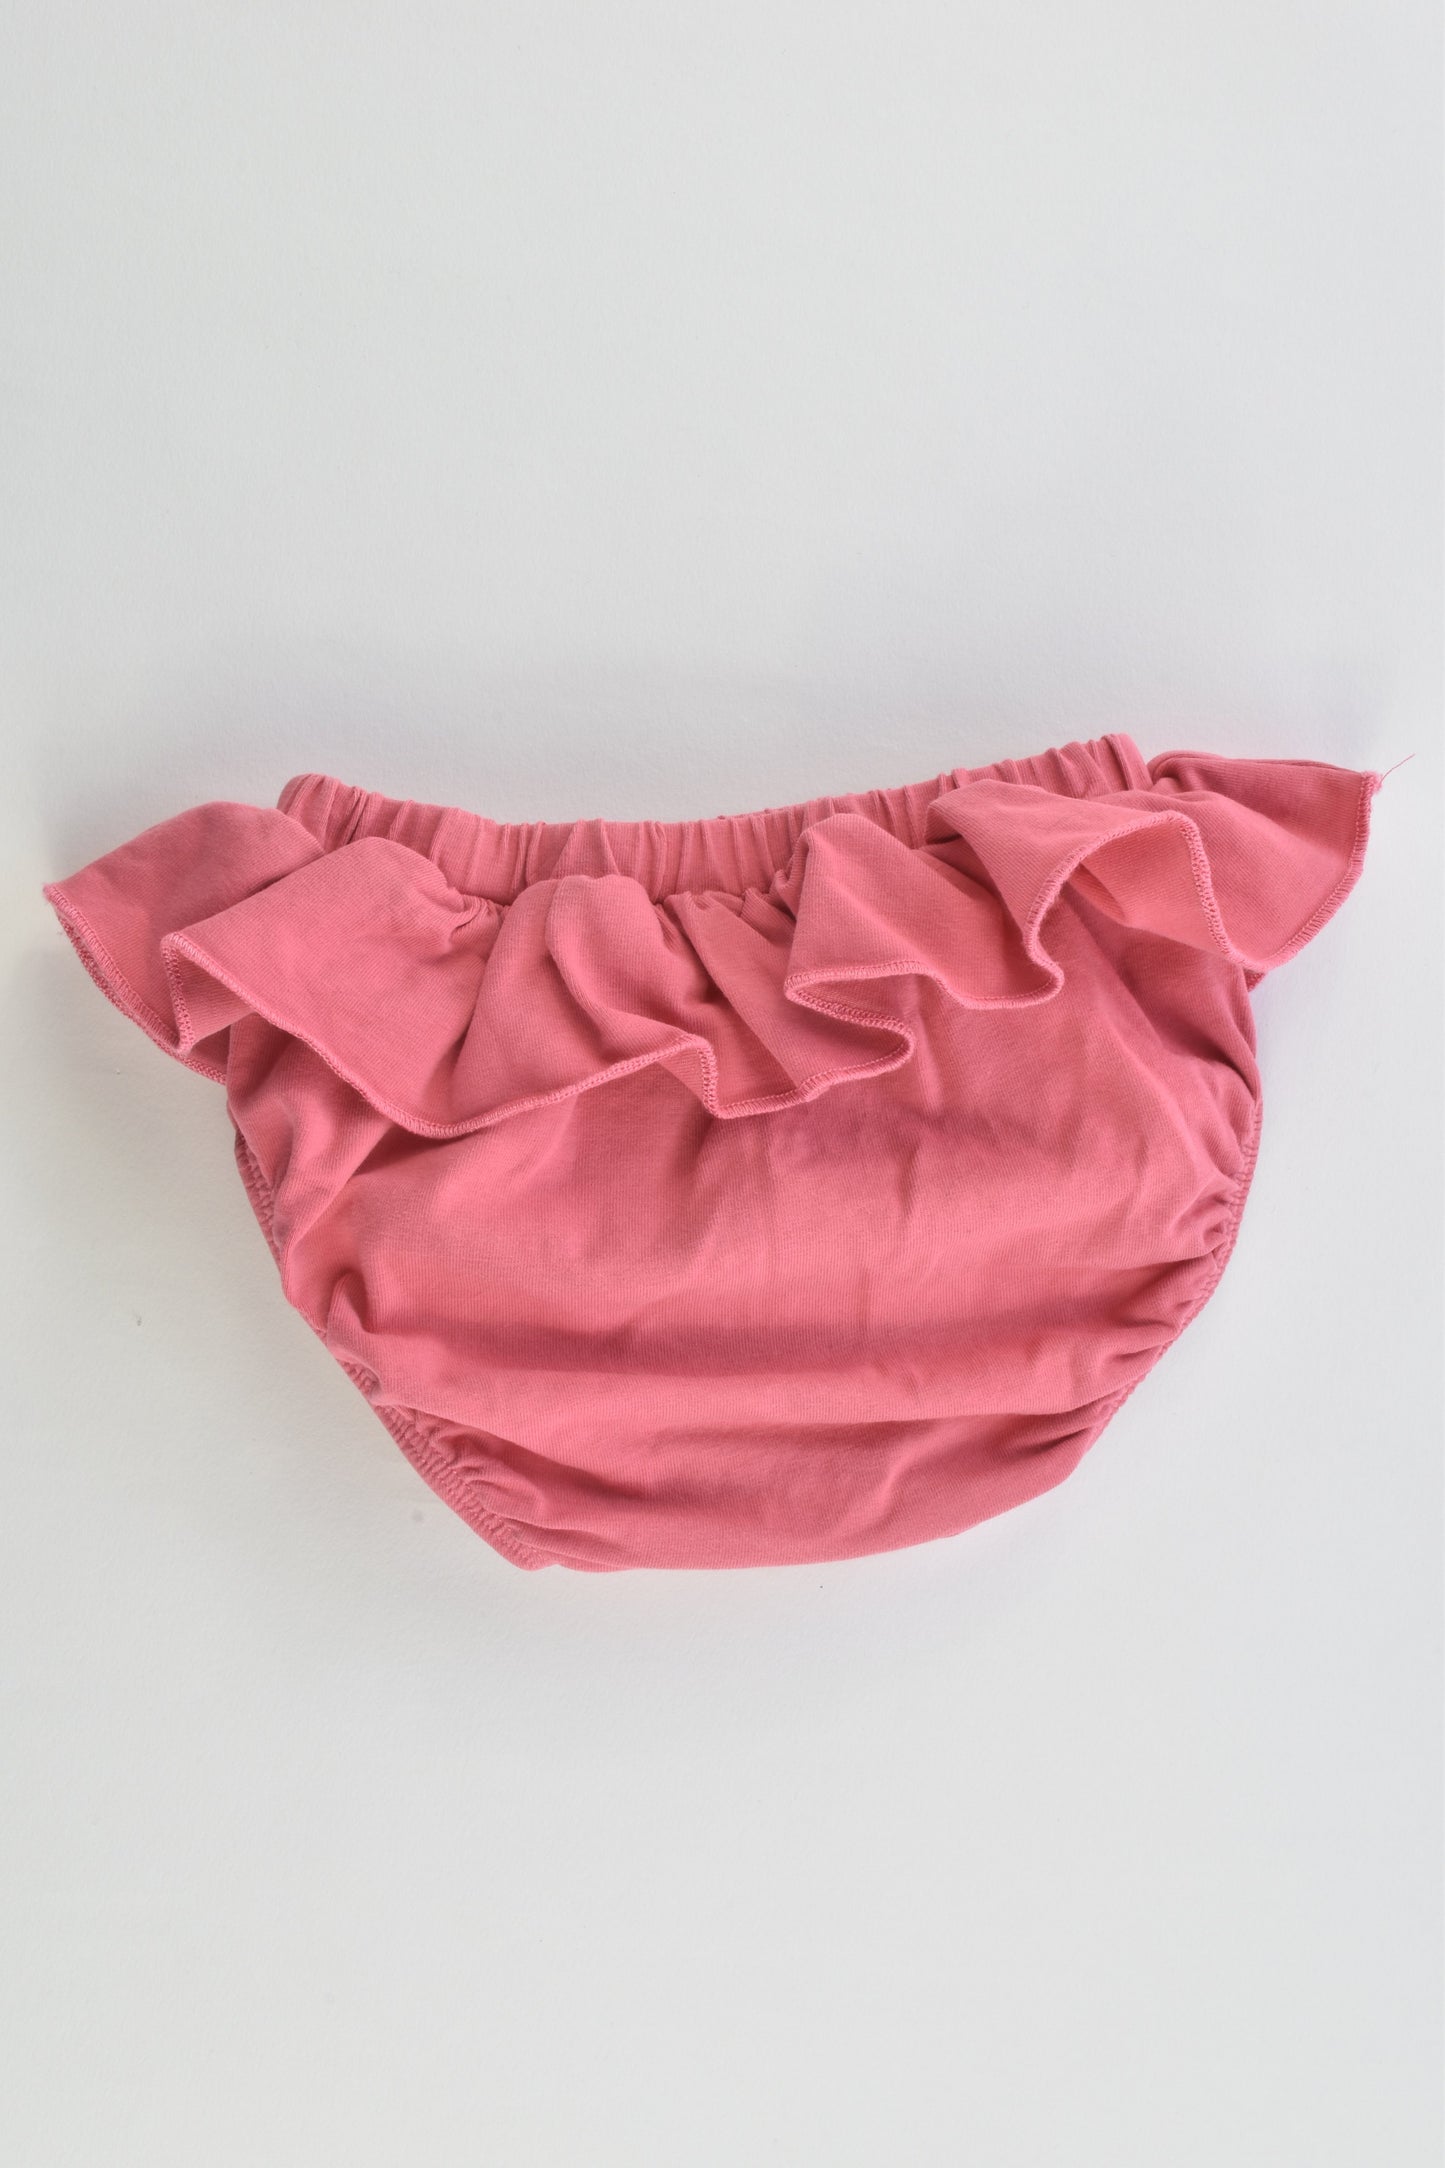 Eeni Meeni Miini Moh Size 00 (3-6 months) Nappy Cover with Ruffle